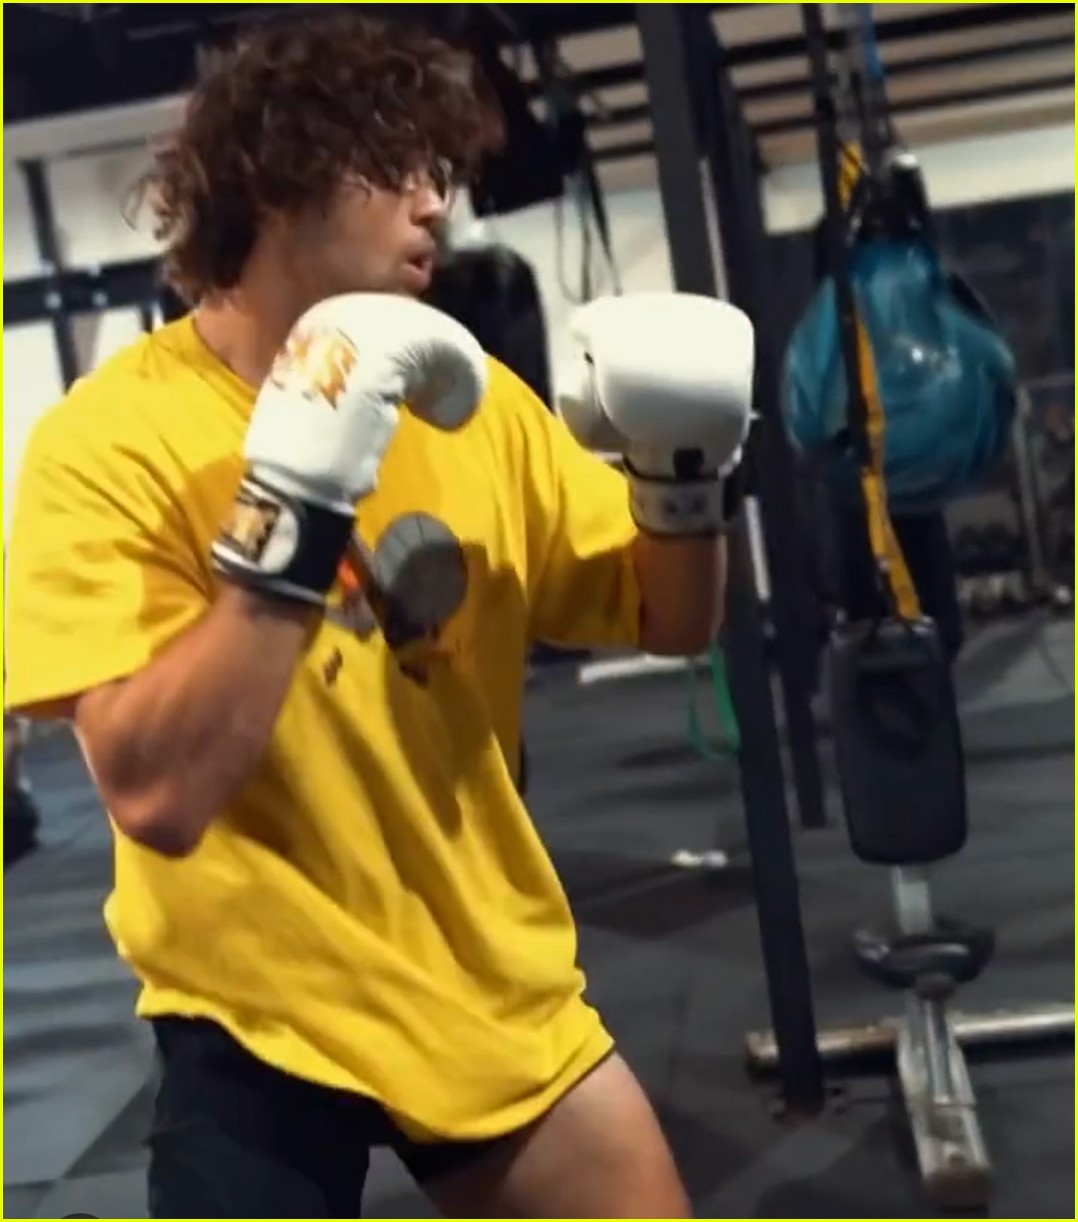 noah centineo shows off his muscles in new fight training videos 04